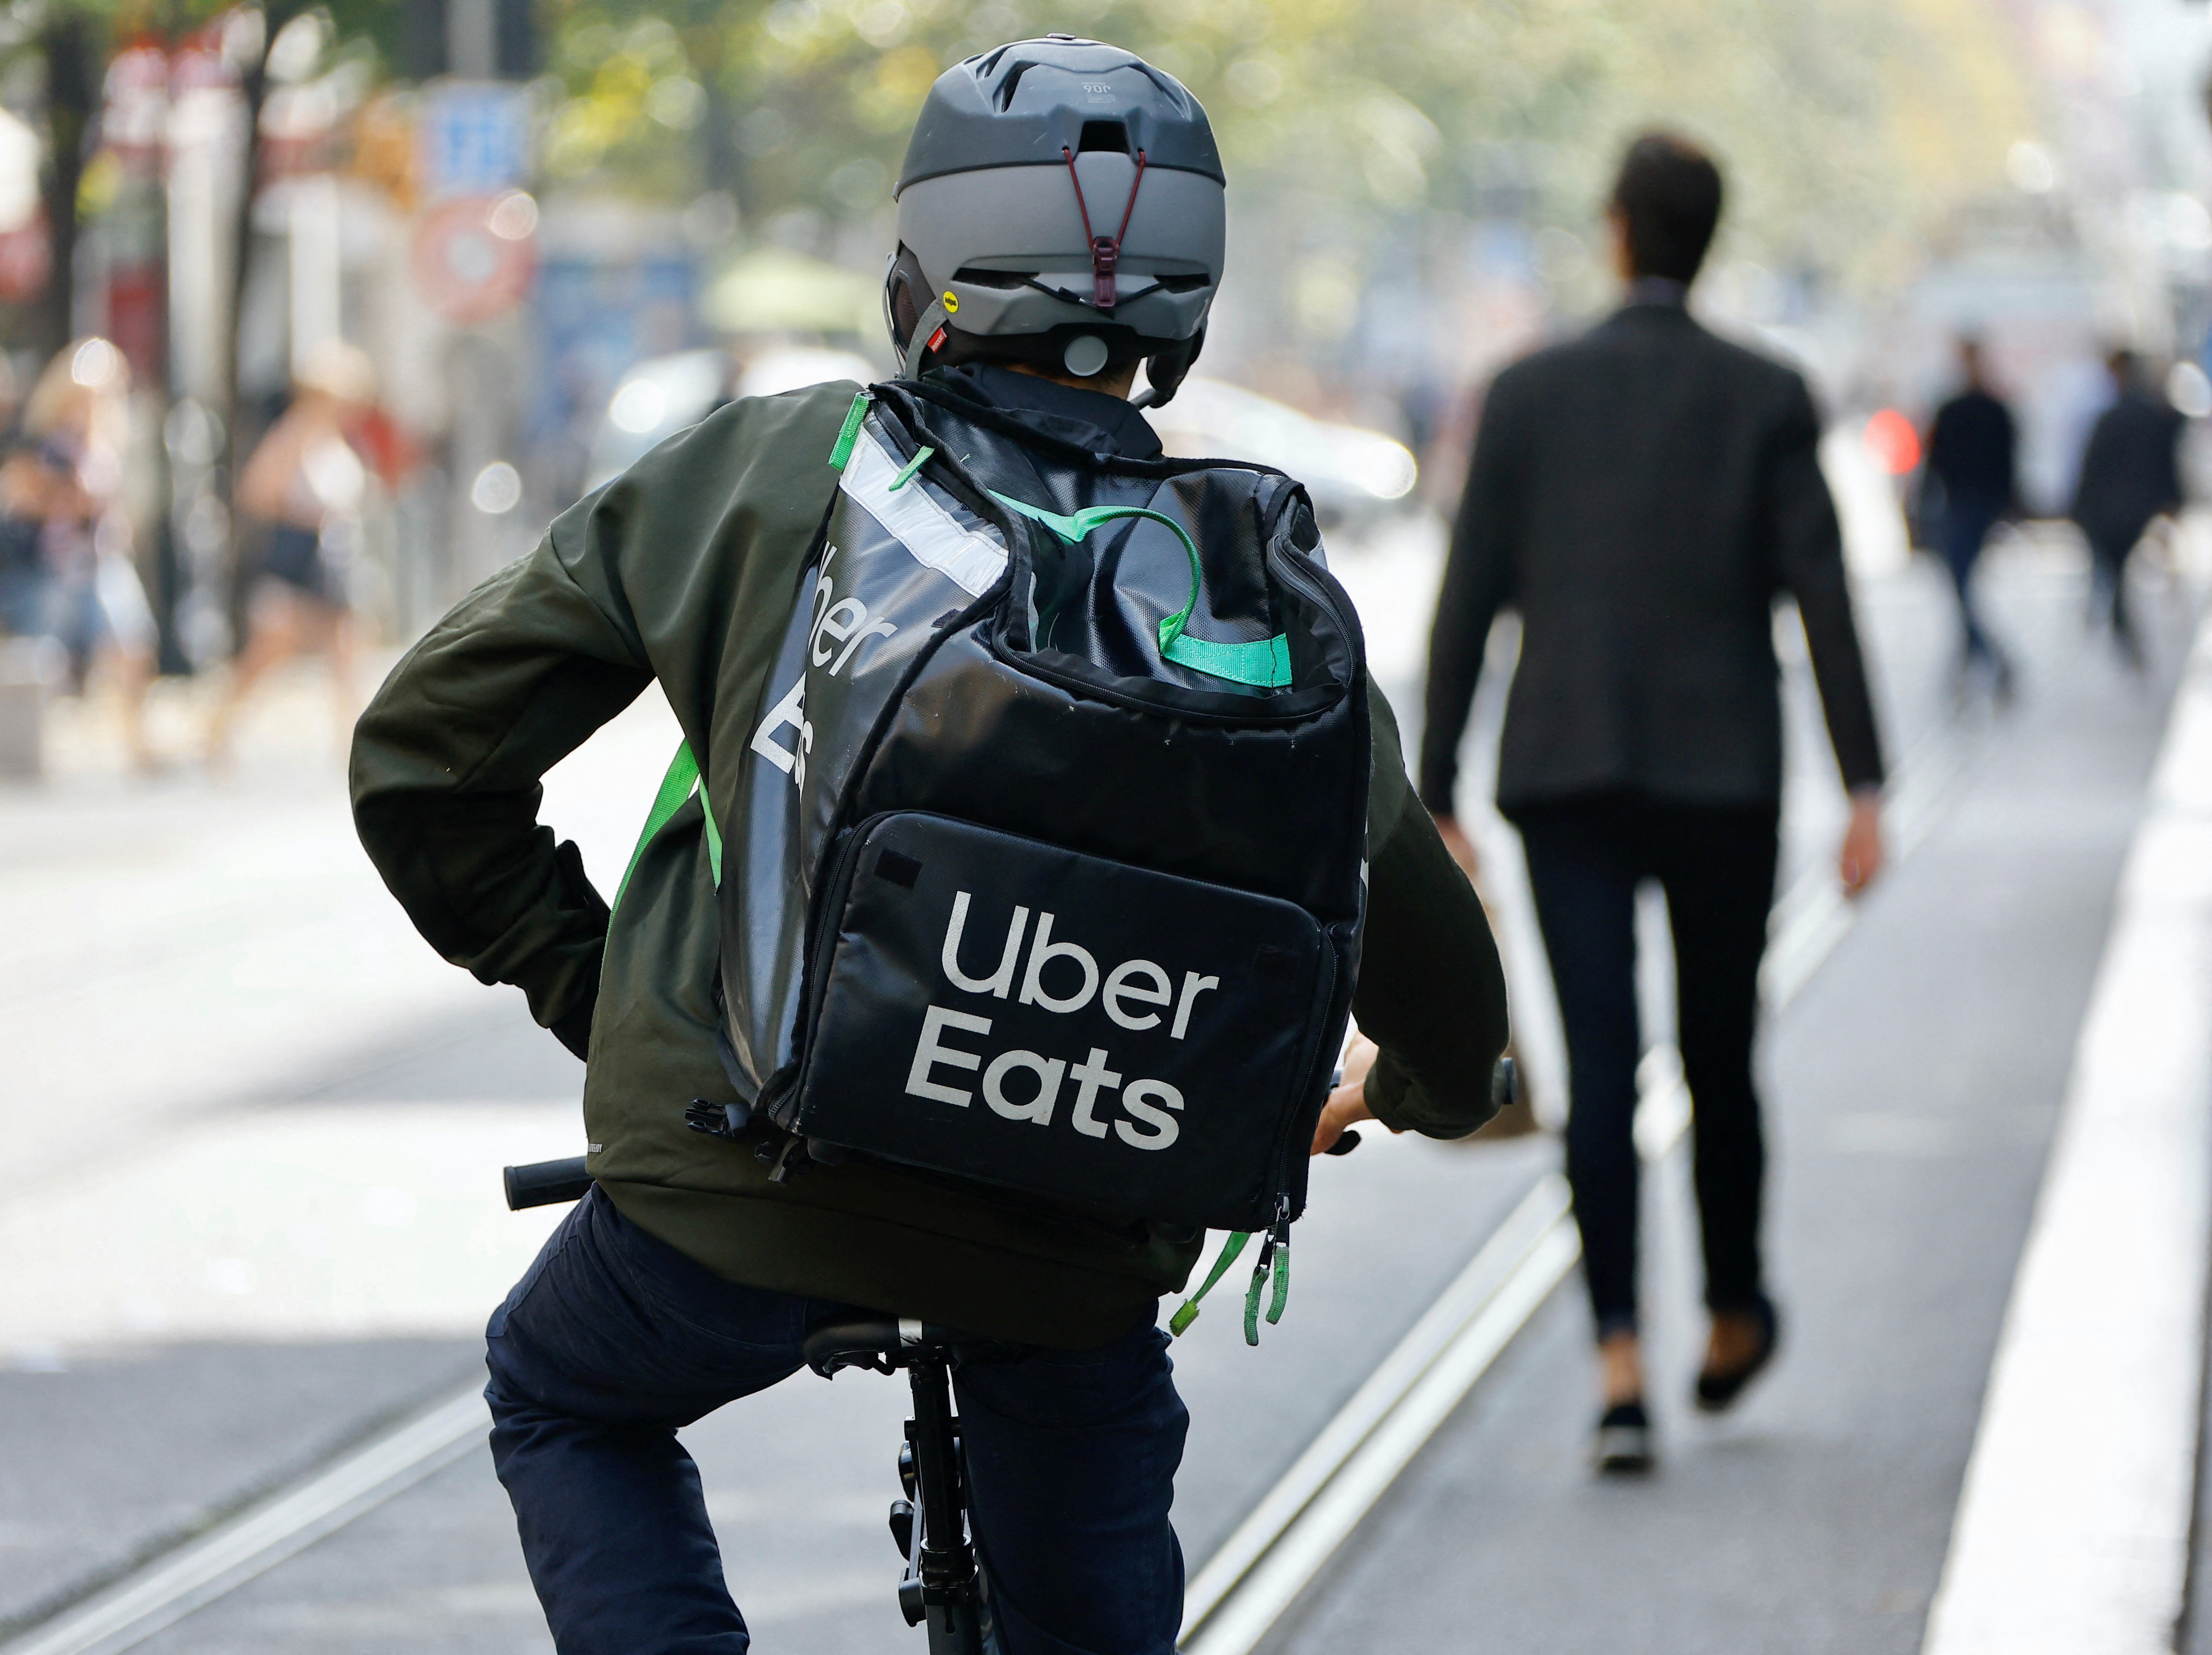 Through these partnerships, Uber may seek to become less dependent on its vast fleet of independent contractors who pick up passengers and deliver food, a business model that has raised legal issues for the company in recent years.  (Reuters/Eric Gaillard)